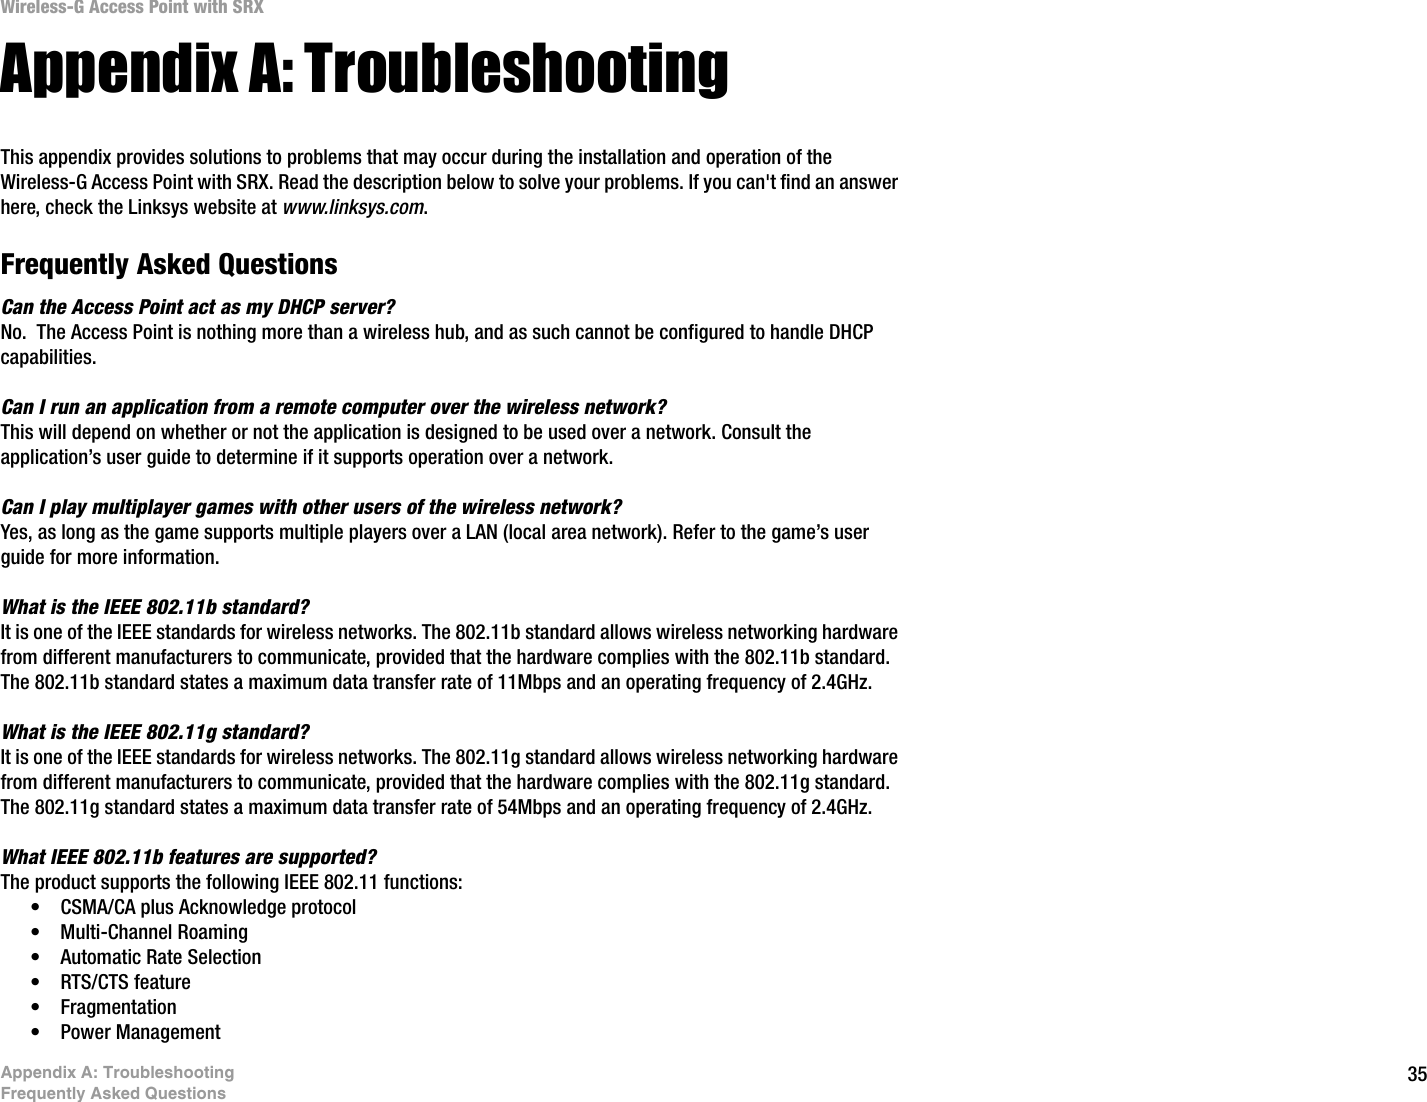 35Appendix A: TroubleshootingFrequently Asked QuestionsWireless-G Access Point with SRXAppendix A: TroubleshootingThis appendix provides solutions to problems that may occur during the installation and operation of the Wireless-G Access Point with SRX. Read the description below to solve your problems. If you can&apos;t find an answer here, check the Linksys website at www.linksys.com.Frequently Asked QuestionsCan the Access Point act as my DHCP server?No.  The Access Point is nothing more than a wireless hub, and as such cannot be configured to handle DHCP capabilities.Can I run an application from a remote computer over the wireless network?This will depend on whether or not the application is designed to be used over a network. Consult the application’s user guide to determine if it supports operation over a network.Can I play multiplayer games with other users of the wireless network?Yes, as long as the game supports multiple players over a LAN (local area network). Refer to the game’s user guide for more information.What is the IEEE 802.11b standard?It is one of the IEEE standards for wireless networks. The 802.11b standard allows wireless networking hardware from different manufacturers to communicate, provided that the hardware complies with the 802.11b standard. The 802.11b standard states a maximum data transfer rate of 11Mbps and an operating frequency of 2.4GHz.What is the IEEE 802.11g standard?It is one of the IEEE standards for wireless networks. The 802.11g standard allows wireless networking hardware from different manufacturers to communicate, provided that the hardware complies with the 802.11g standard. The 802.11g standard states a maximum data transfer rate of 54Mbps and an operating frequency of 2.4GHz.What IEEE 802.11b features are supported?The product supports the following IEEE 802.11 functions: • CSMA/CA plus Acknowledge protocol • Multi-Channel Roaming • Automatic Rate Selection • RTS/CTS feature • Fragmentation • Power Management  